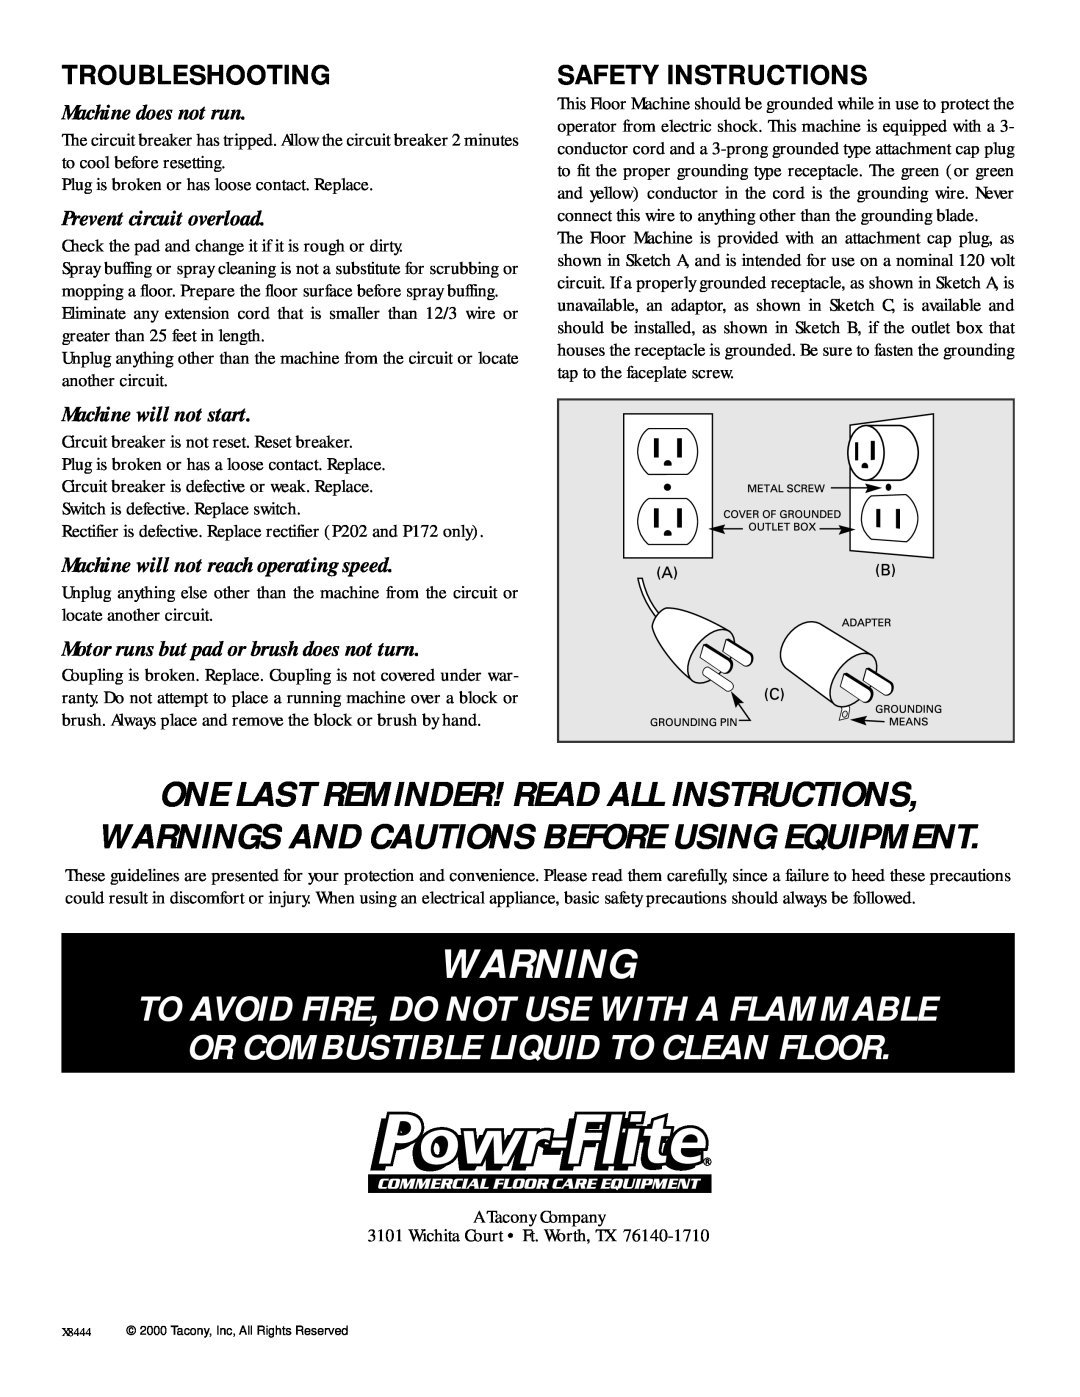 Addtron Technology P201 manual Troubleshooting, Safety Instructions, One Last Reminder! Read All Instructions 